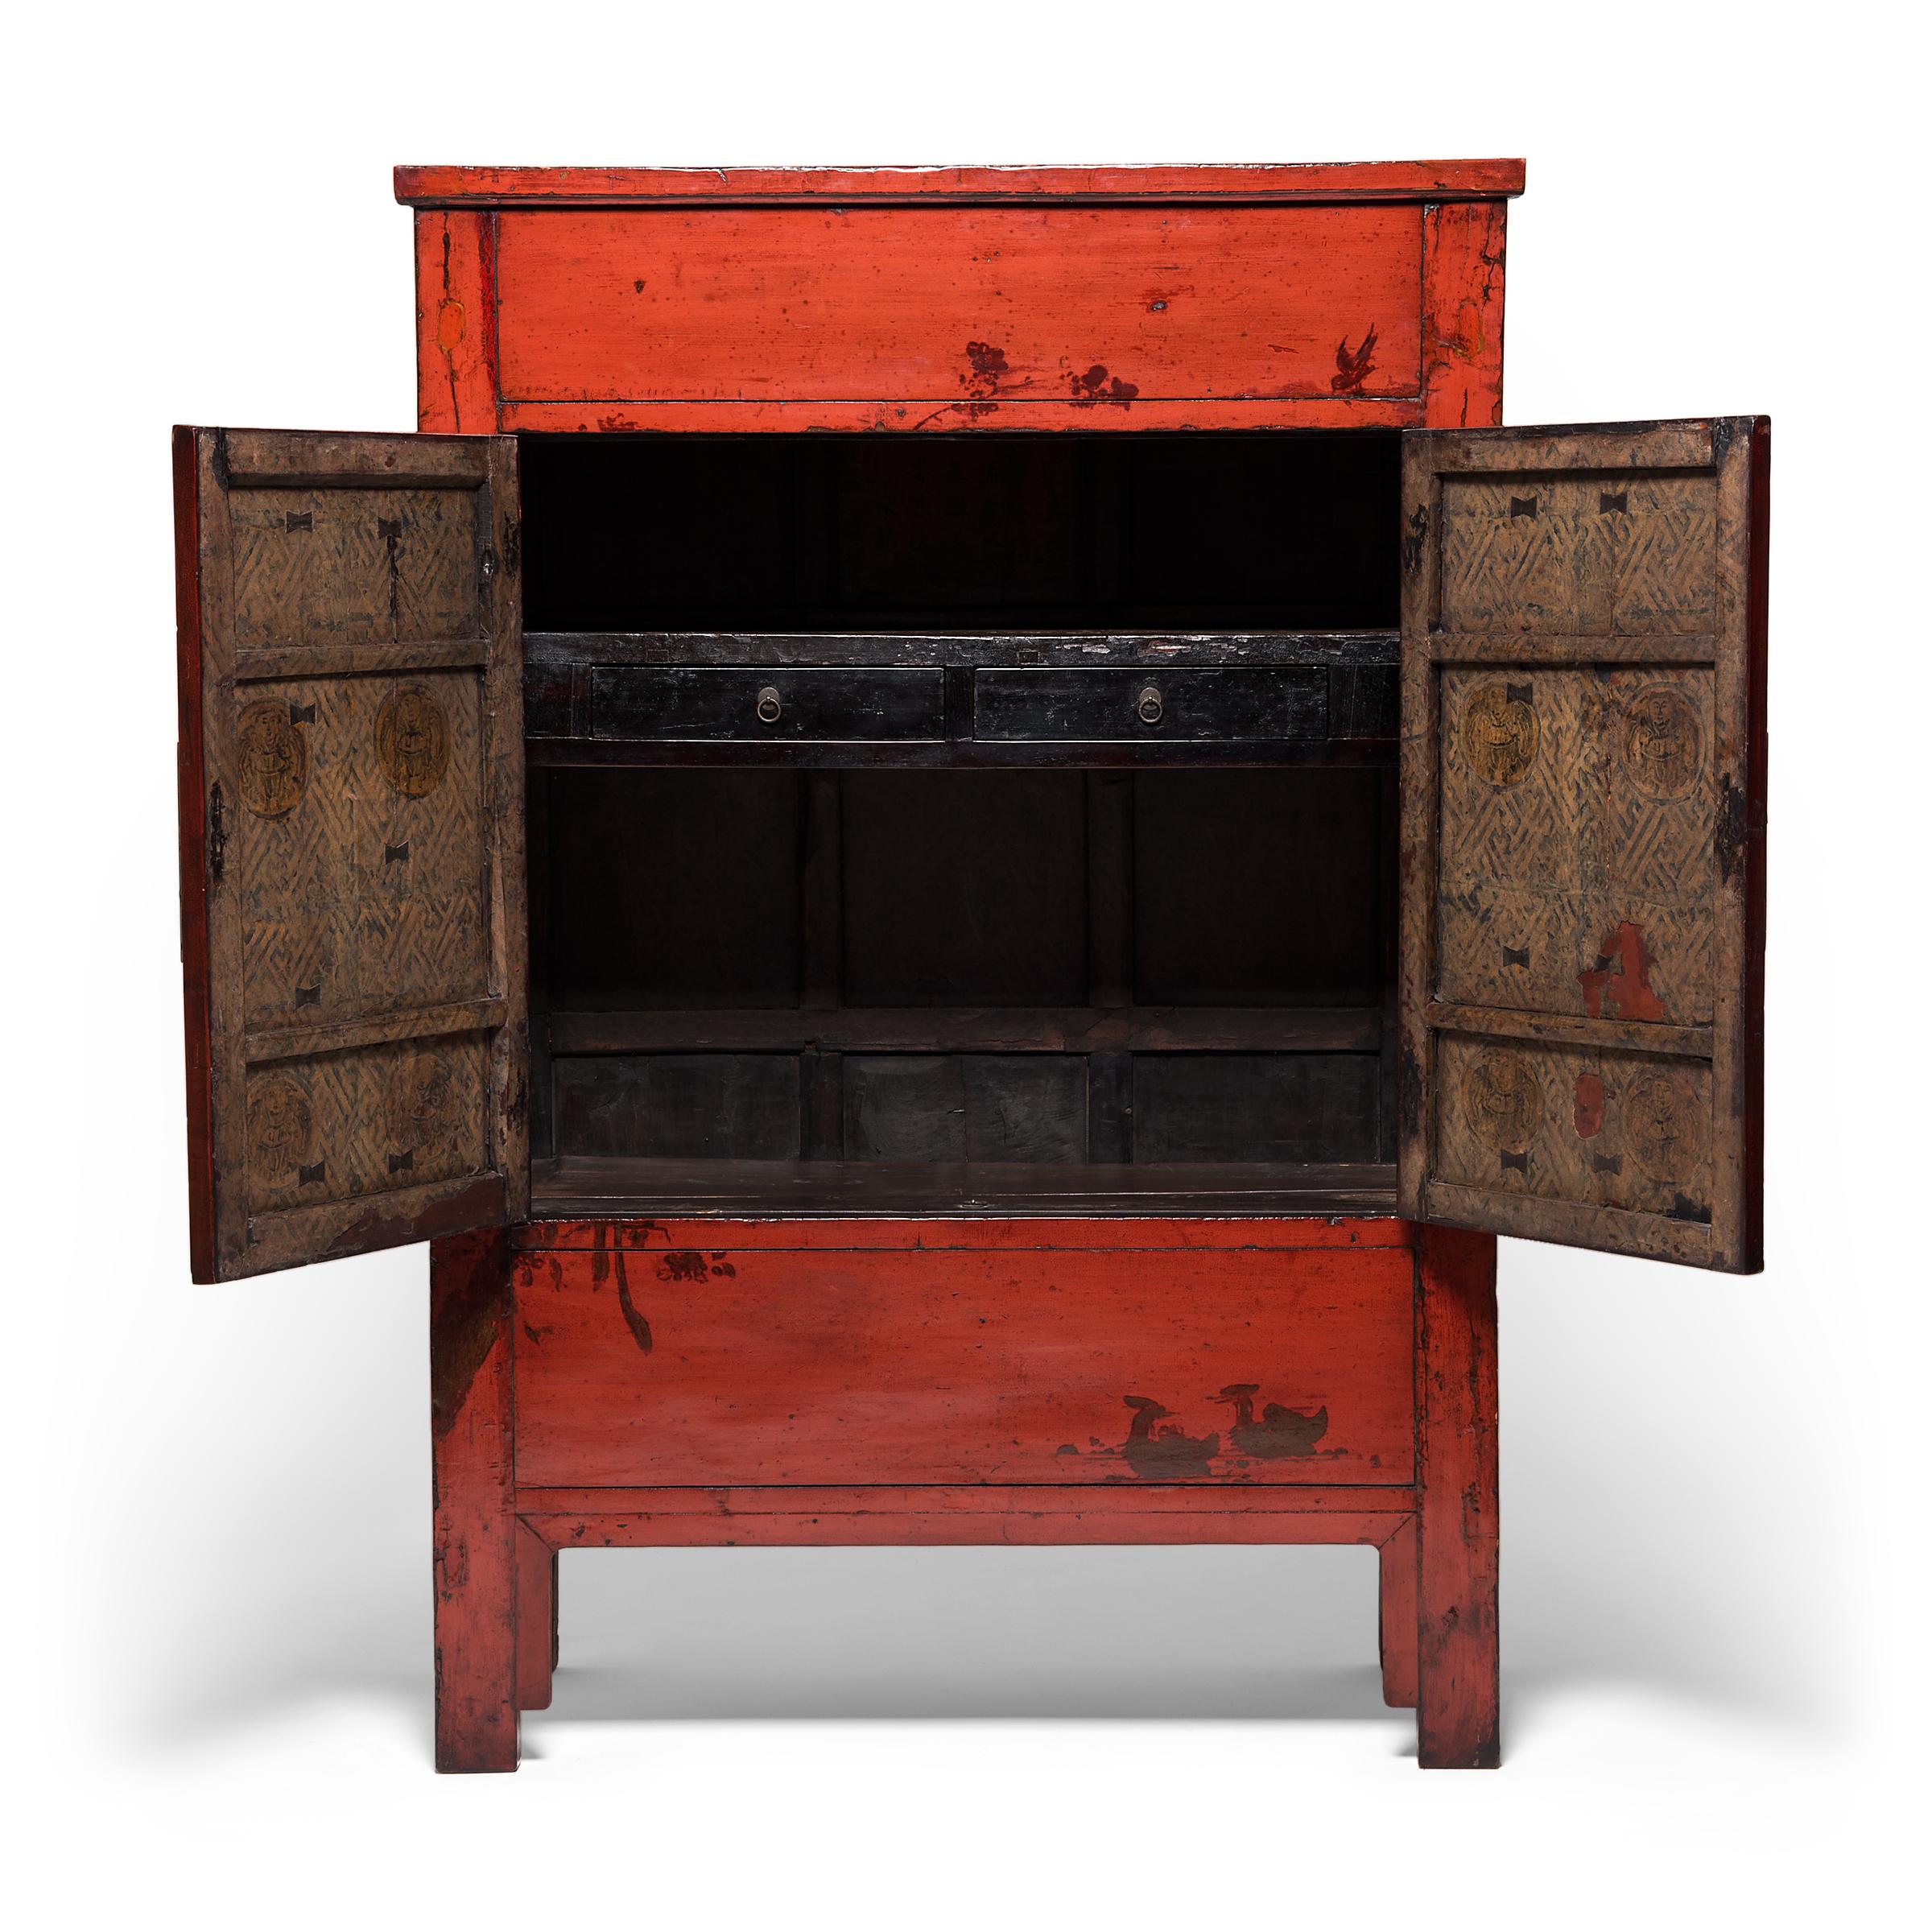 Pair of Chinese Red Lacquer Cabinets with Birds in Flight, c. 1850 For Sale 5